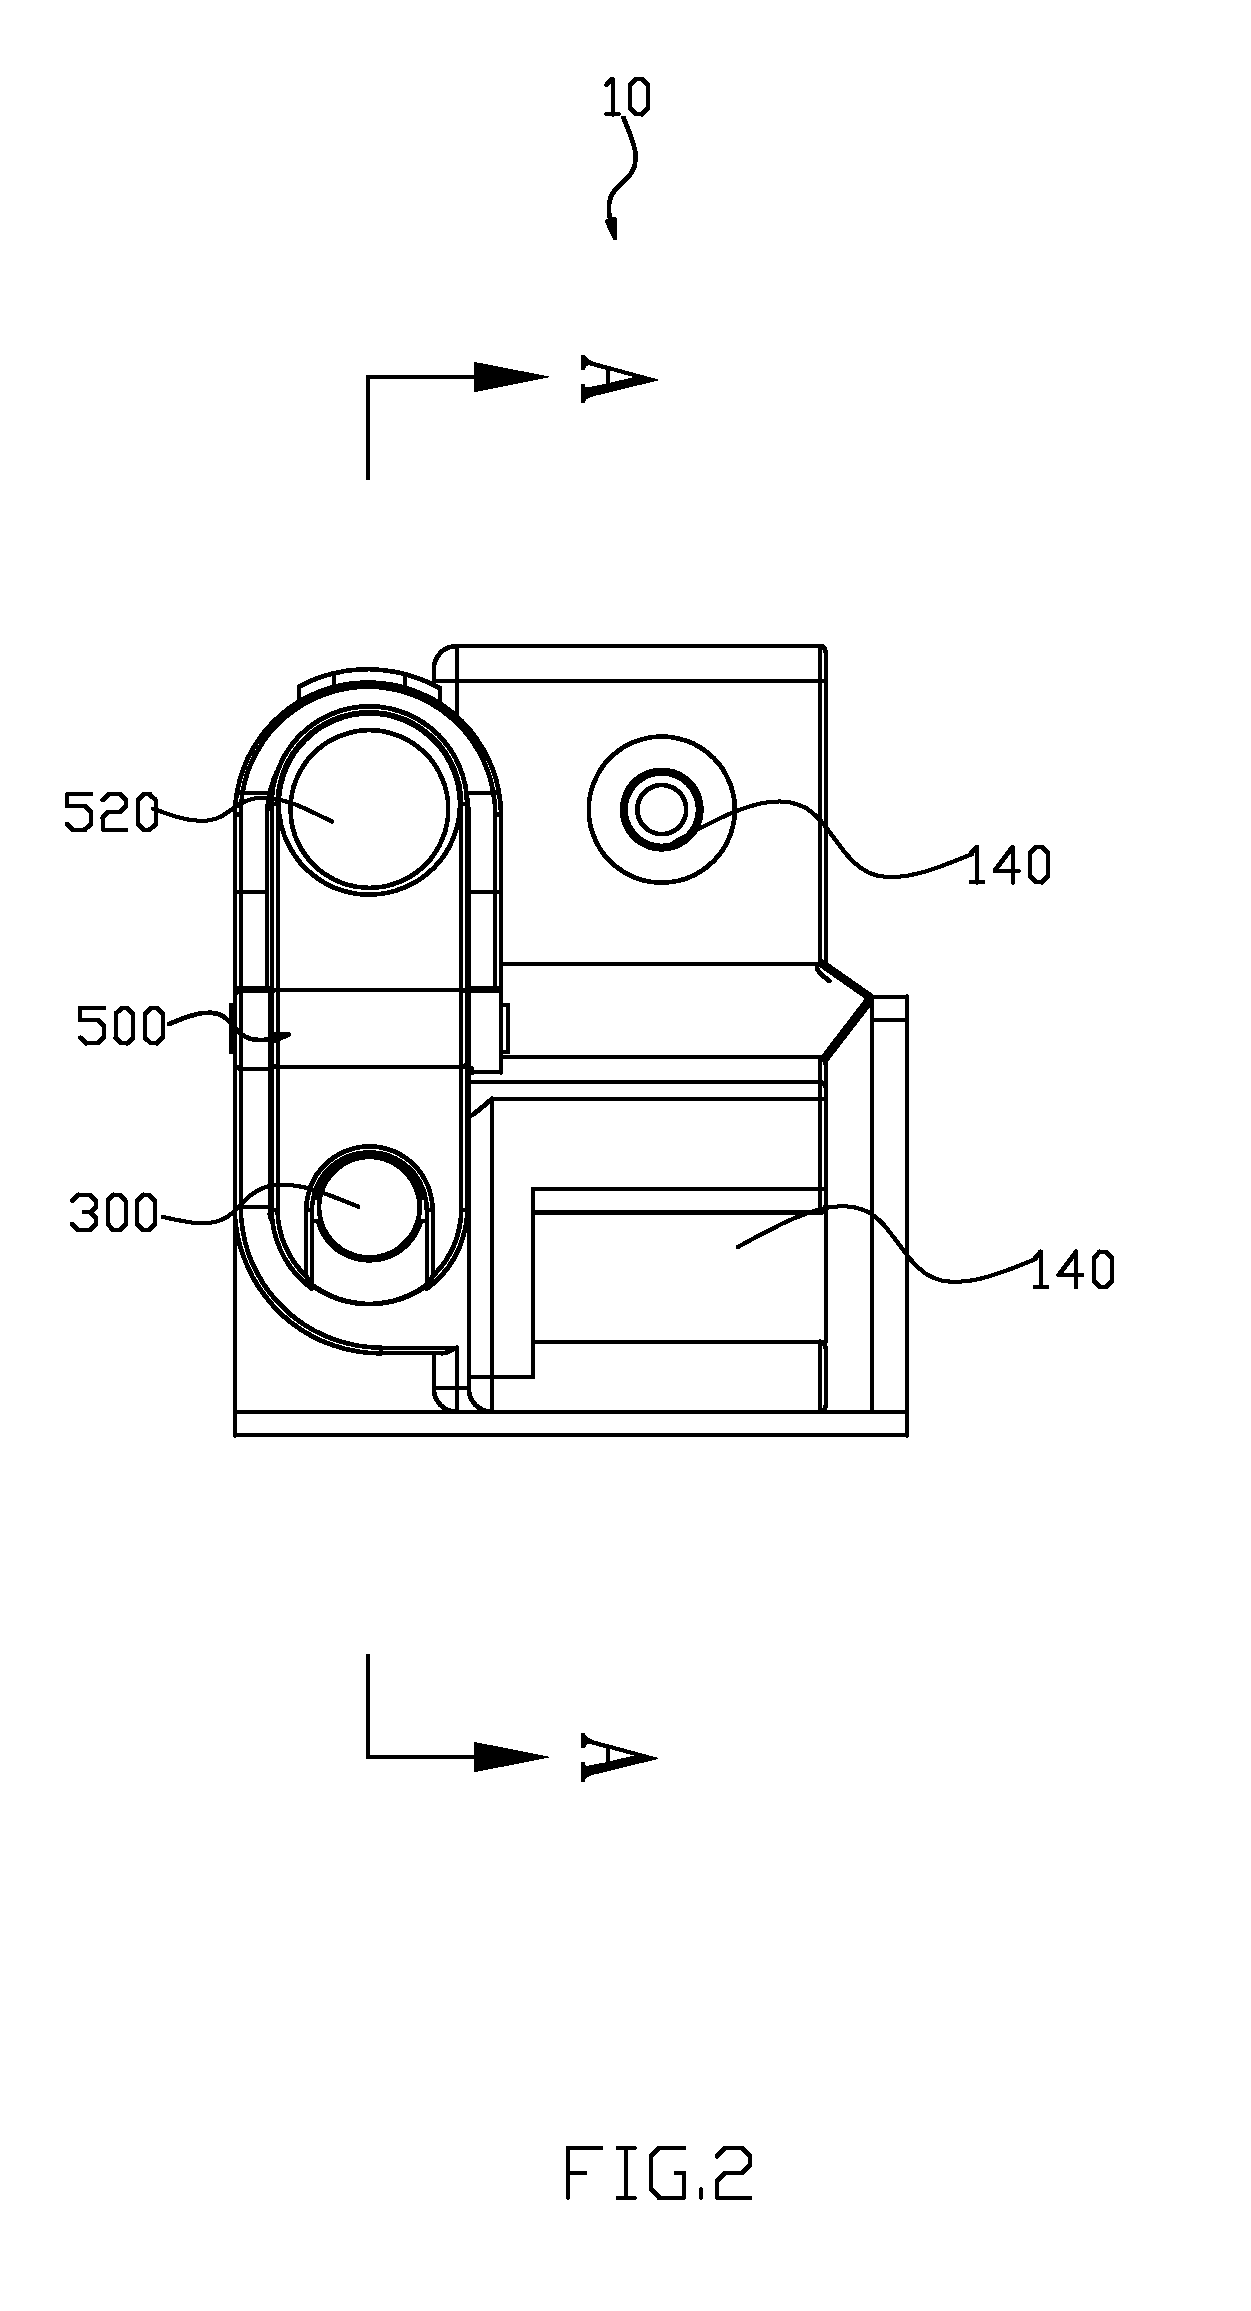 Sliding device used on the supporting shaft